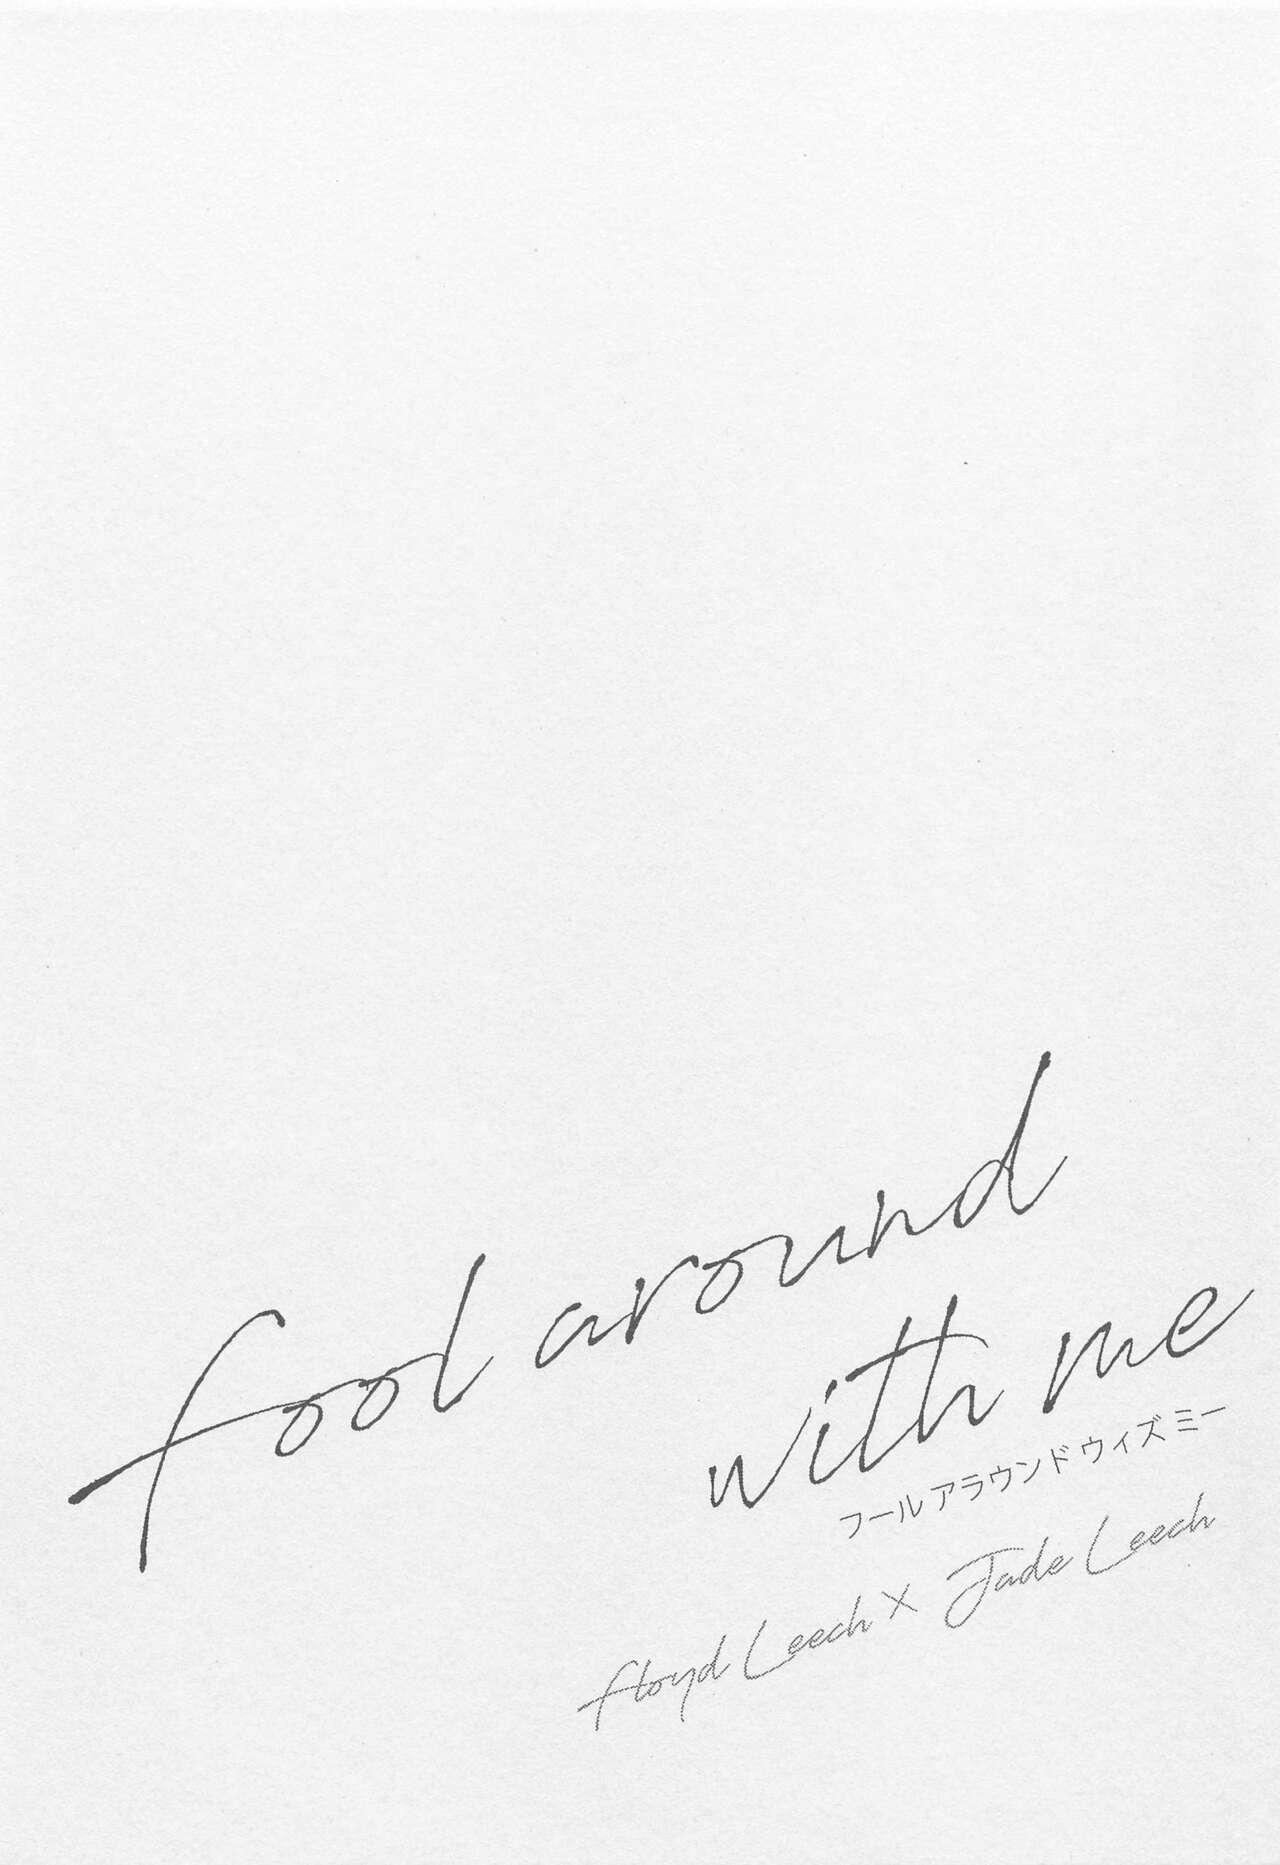 Fool around with me 1